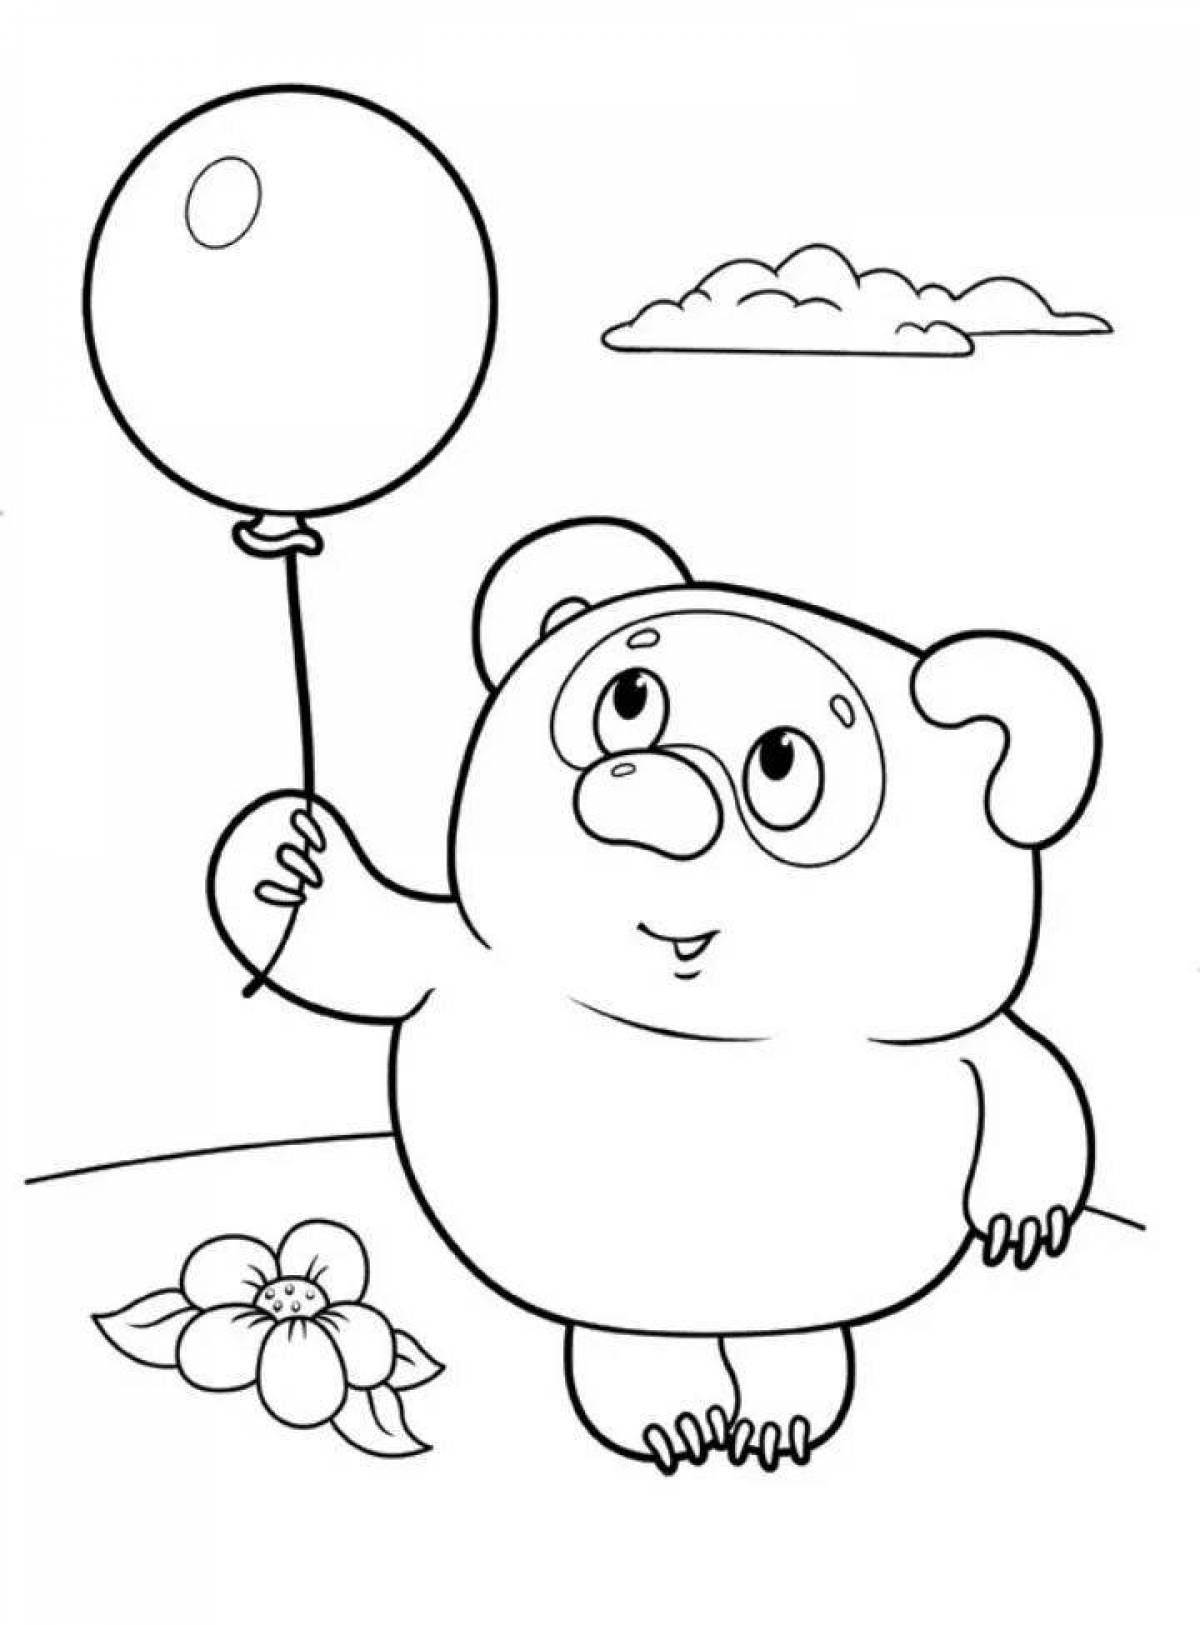 Winnie the Pooh creative coloring book for kids